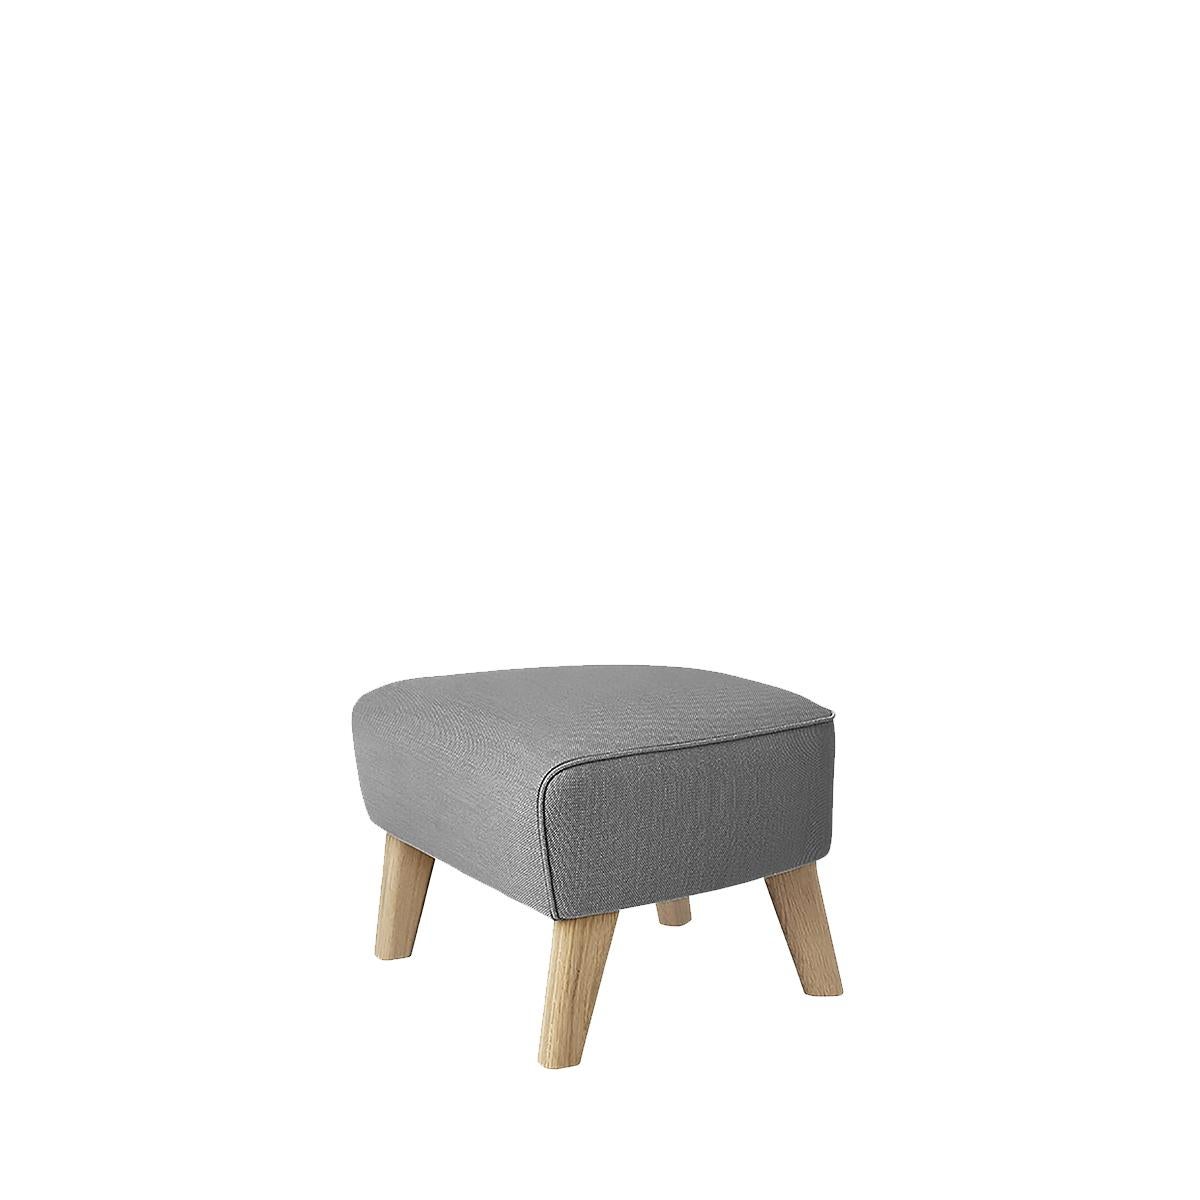 Grey and natural oak Sahco Zero footstool by Lassen
Dimensions: W 56 x D 58 x H 40 cm 
Materials: Textile
Also available: Other colors available,

The my own chair footstool has been designed in the same spirit as Flemming Lassen’s original